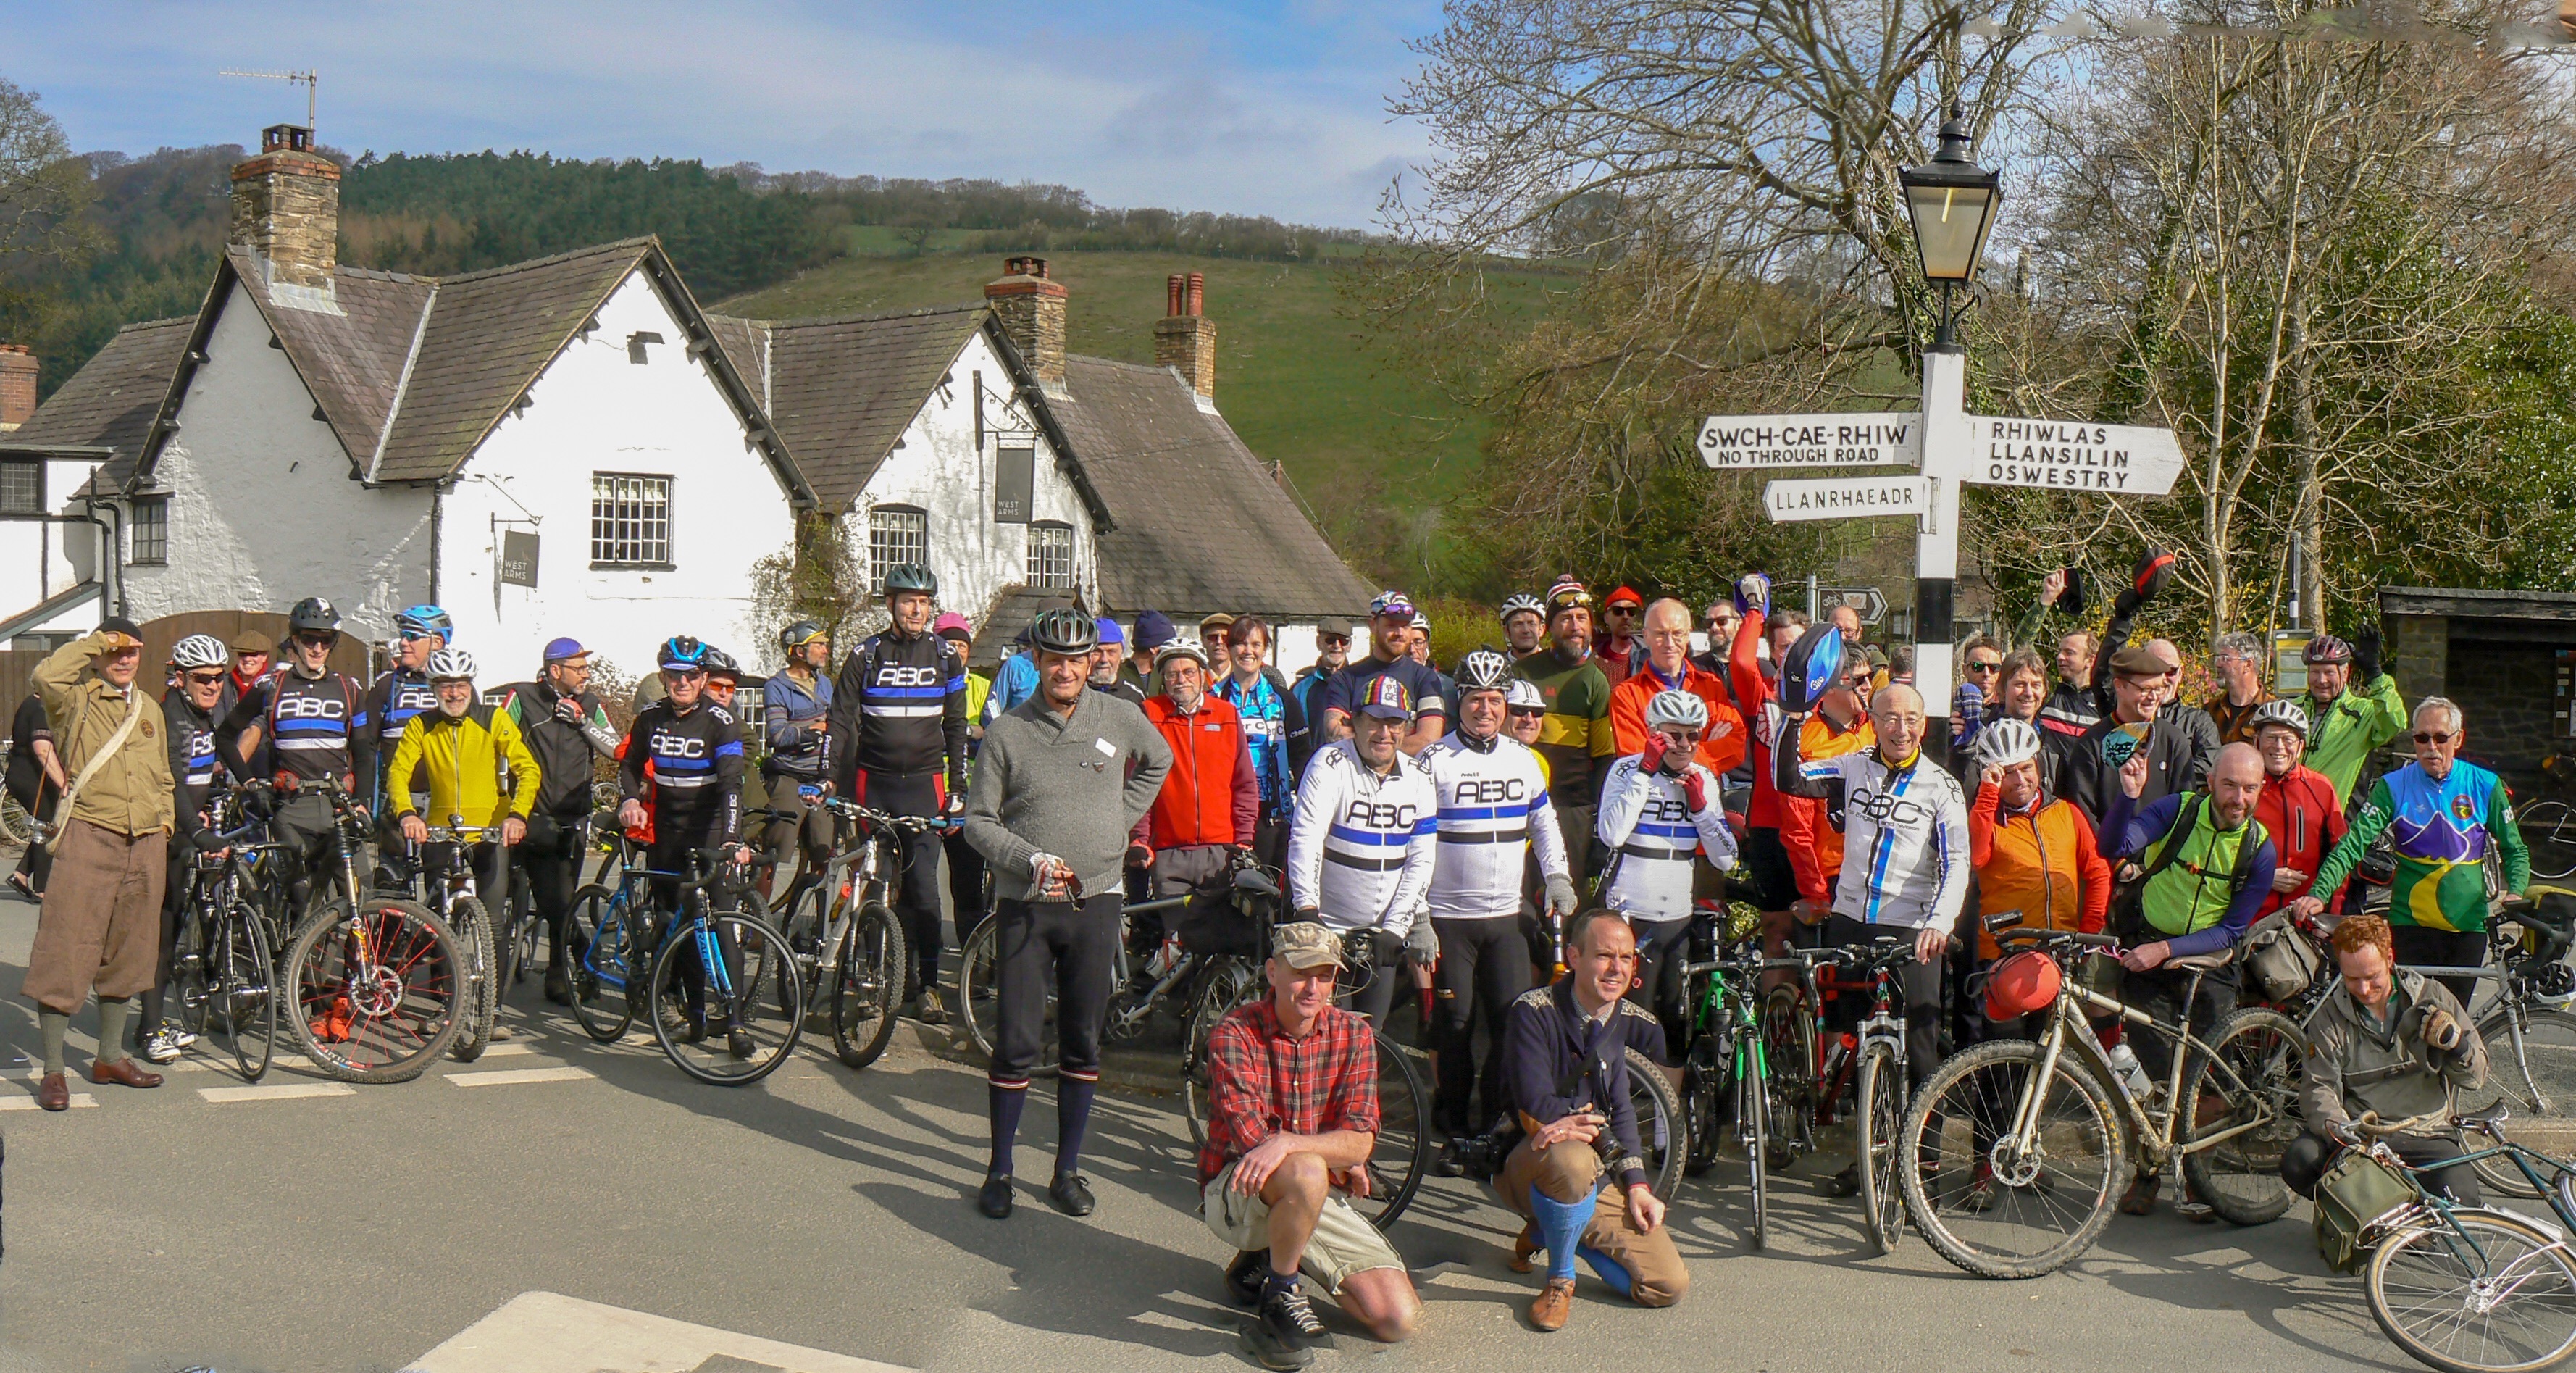 Wayfarer Centenary ride with the Veteran-Cycle Club and the Rough Stuff Fellowship, March 2019 